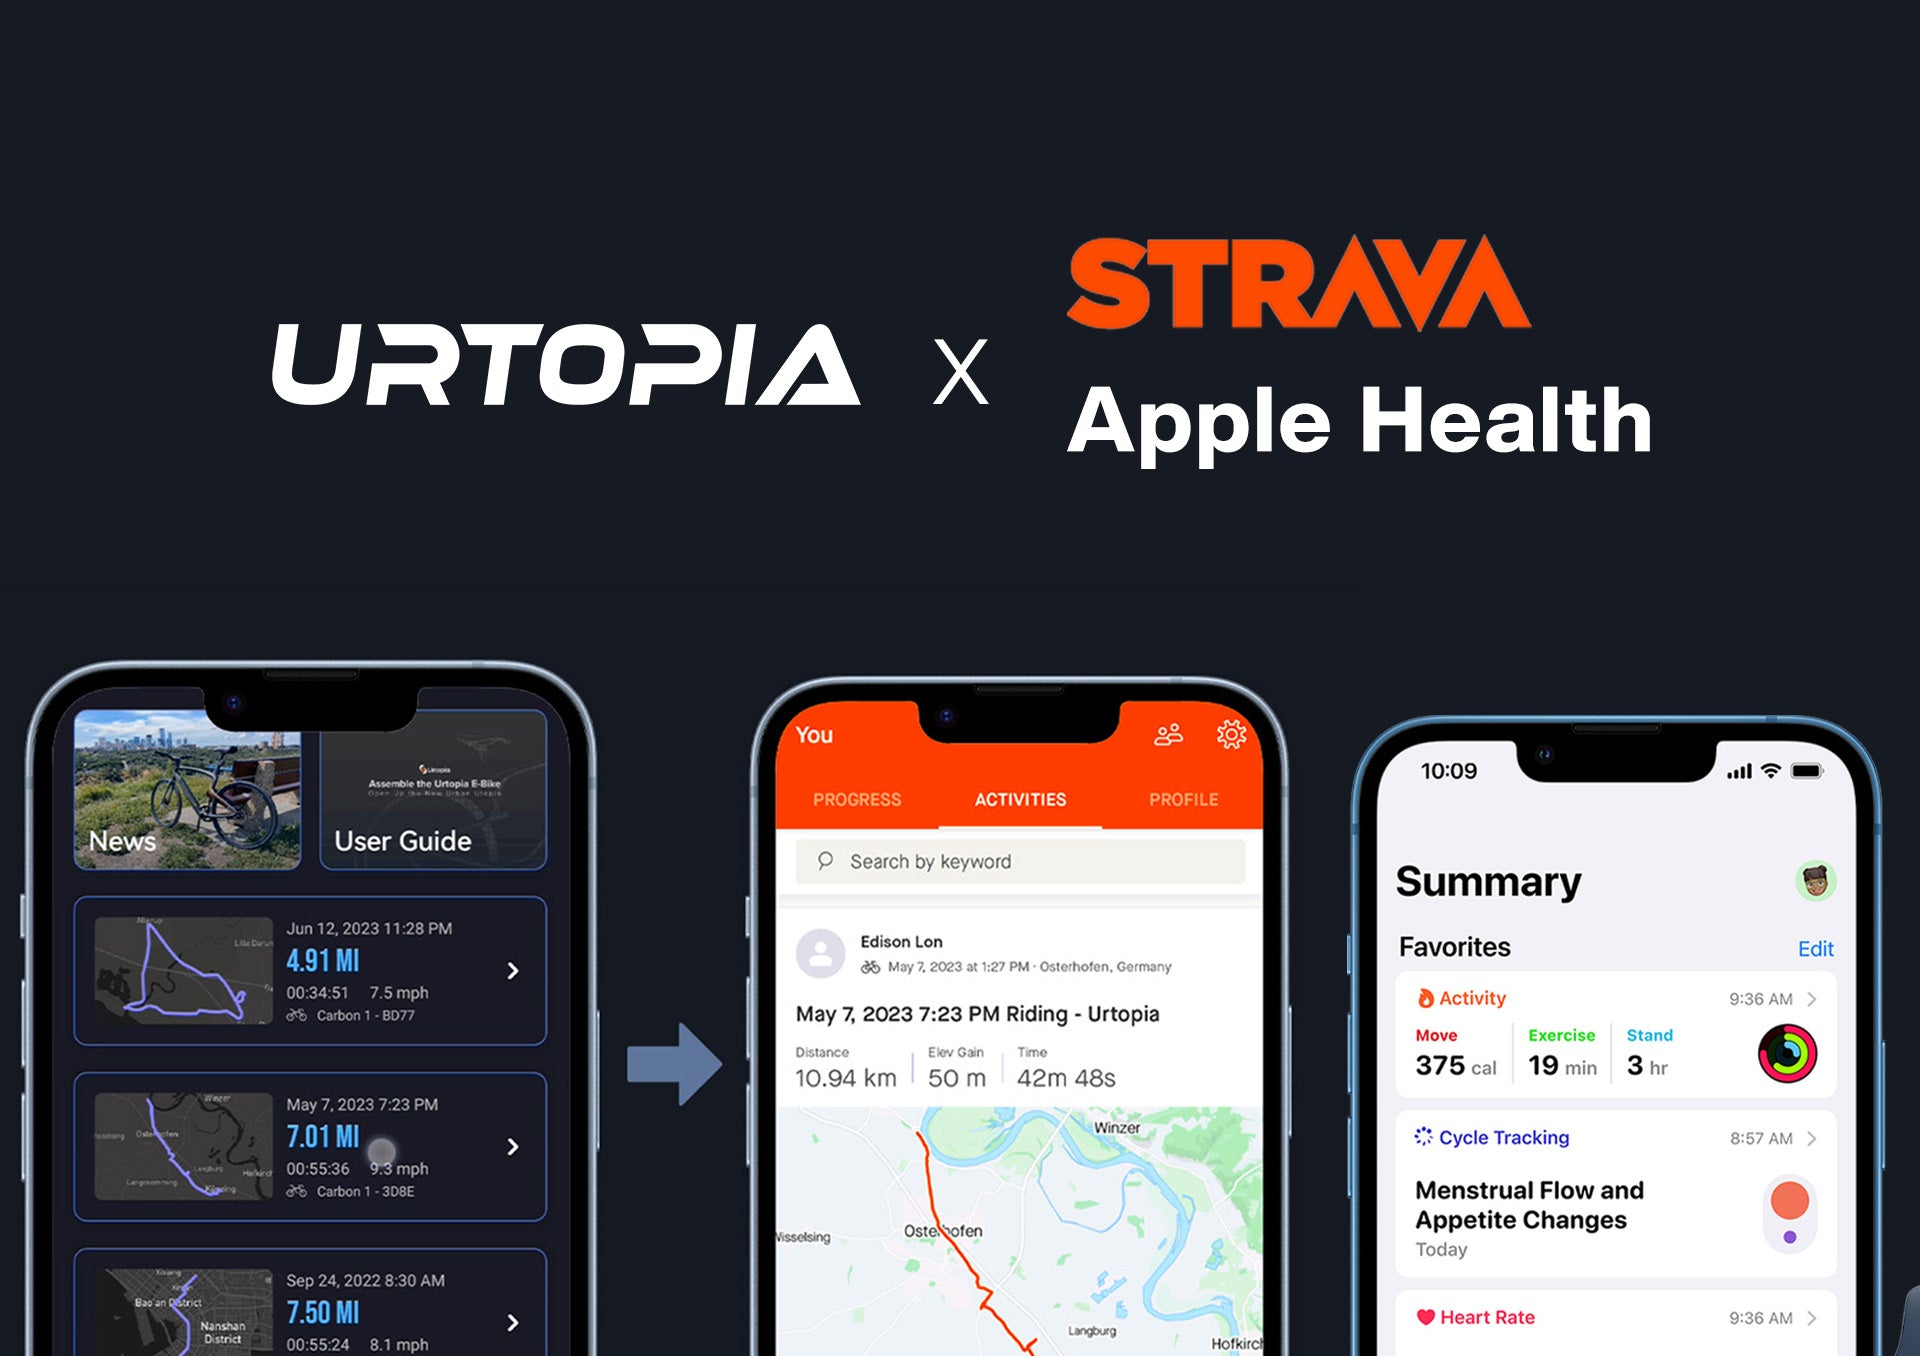 Urtopia APP connects with strava and apple health